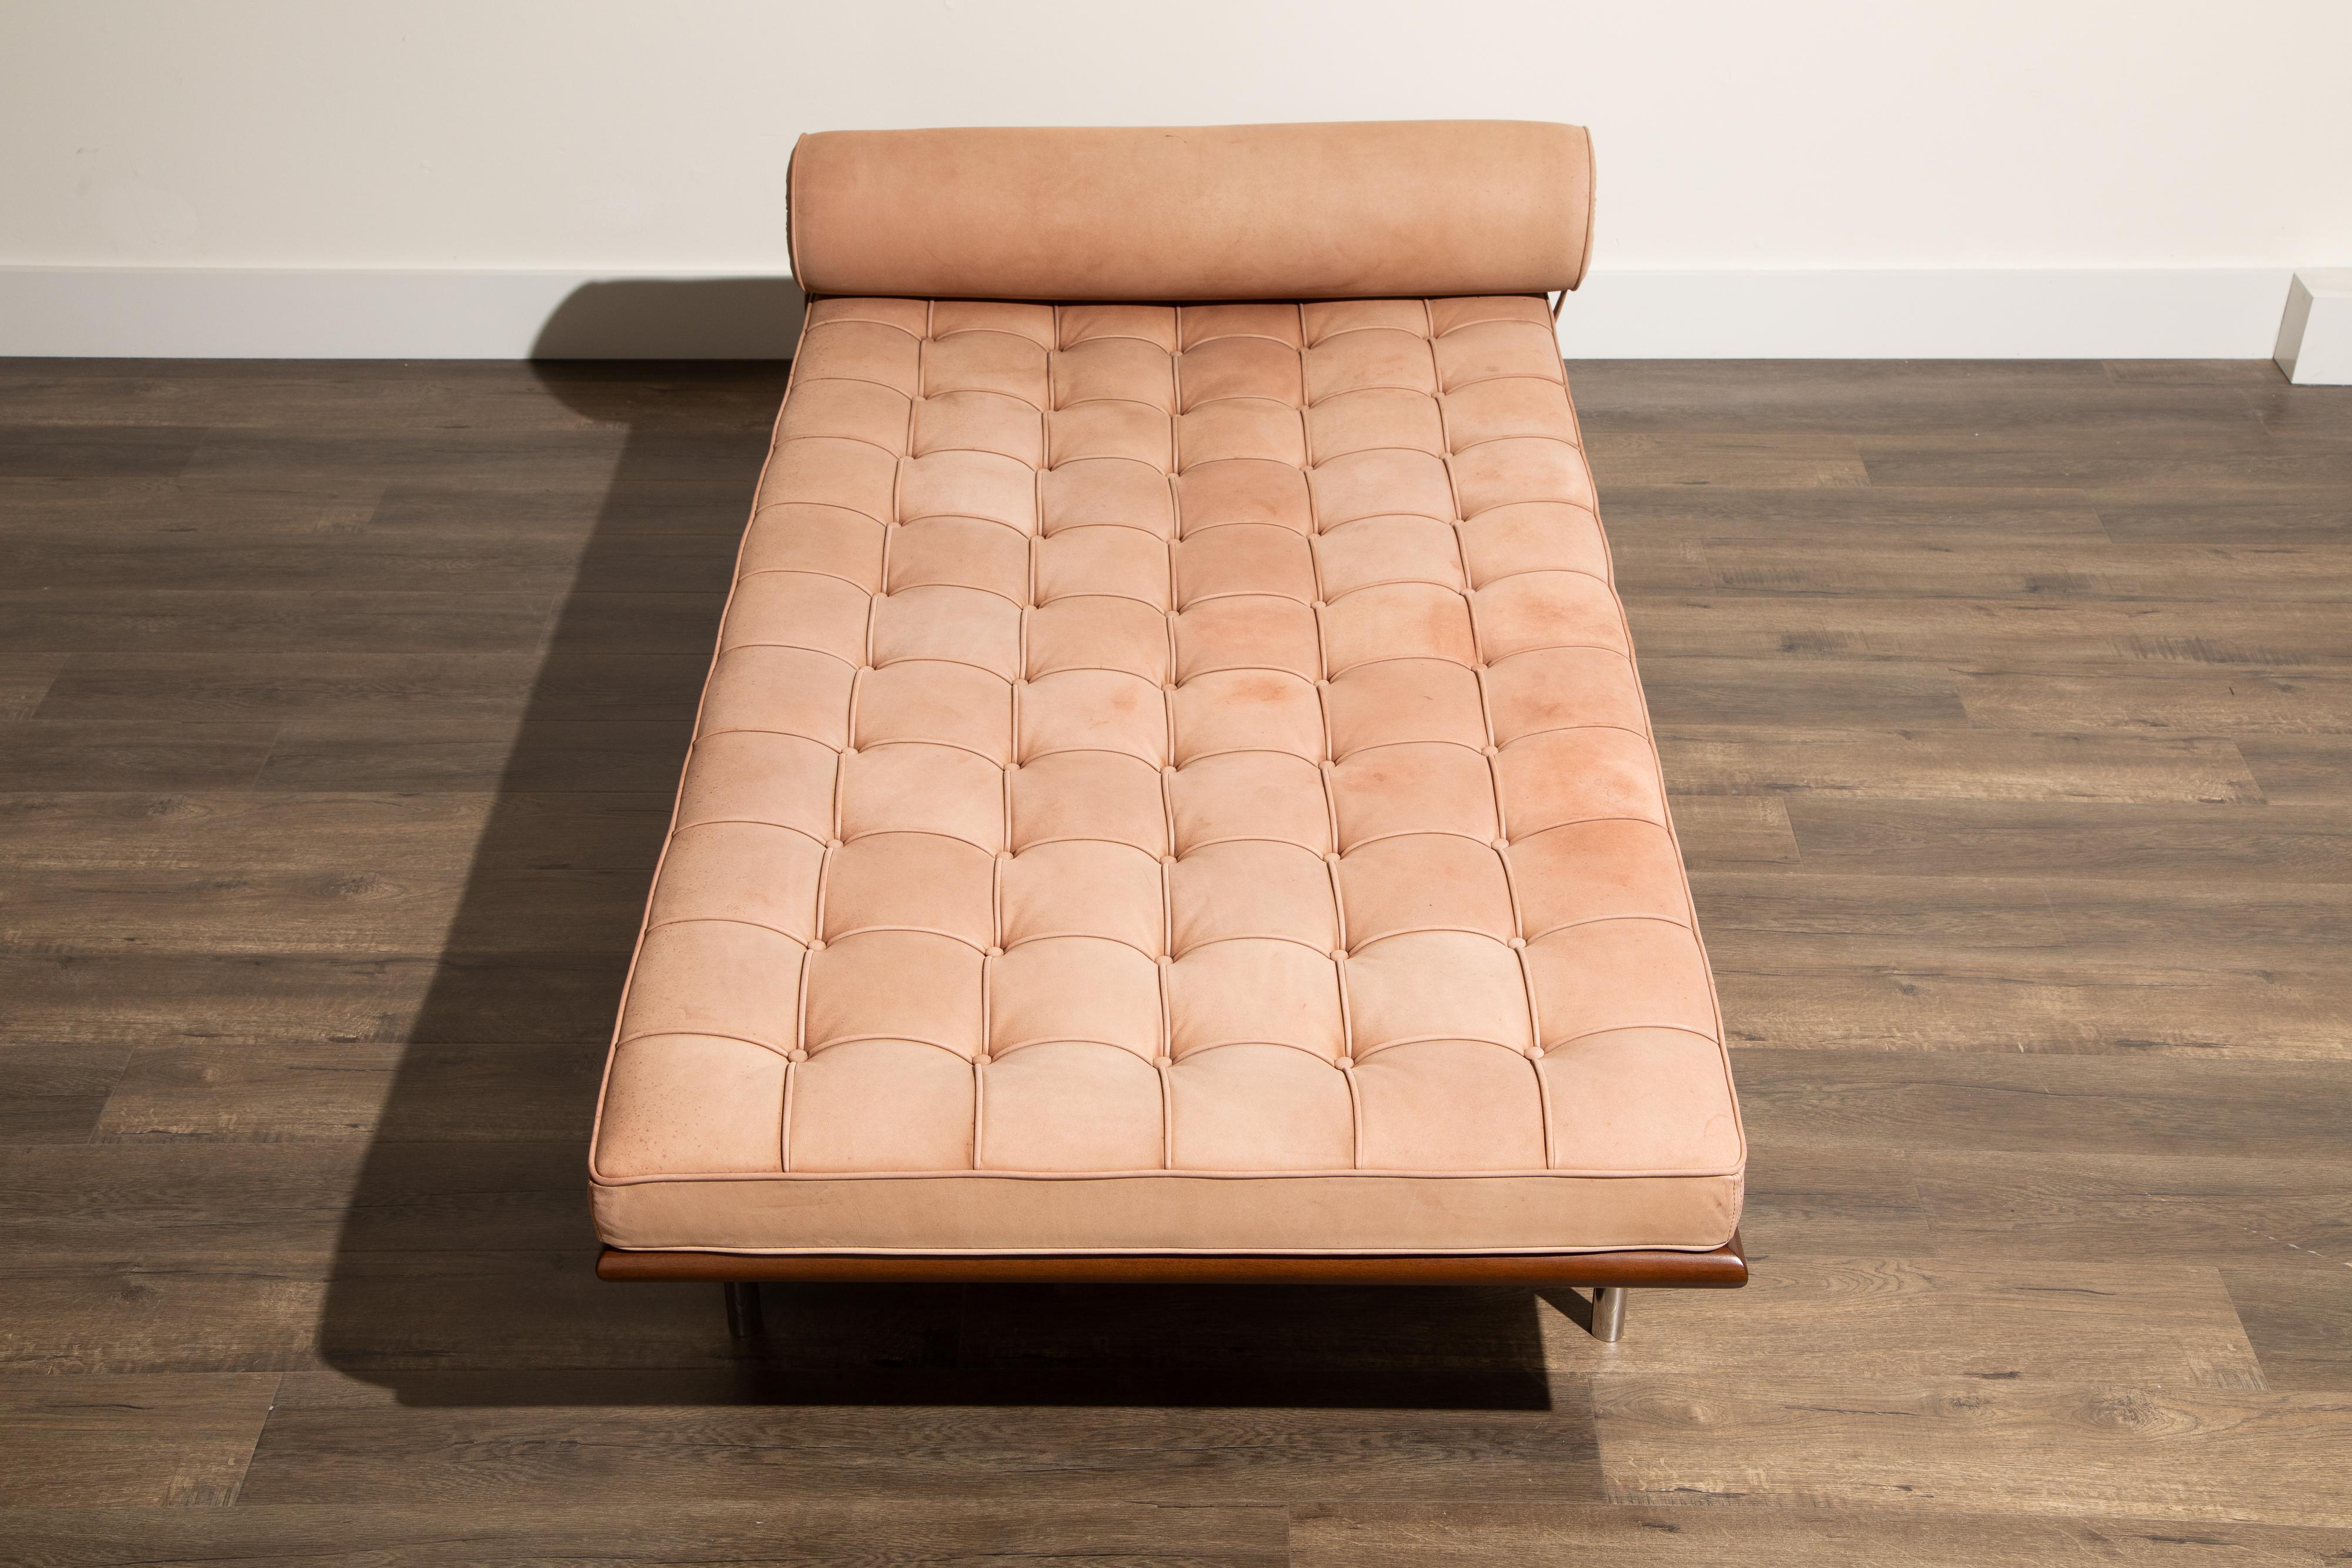 American Barcelona Daybed in Nude Suede by Ludwig Mies van der Rohe for Knoll, Signed 